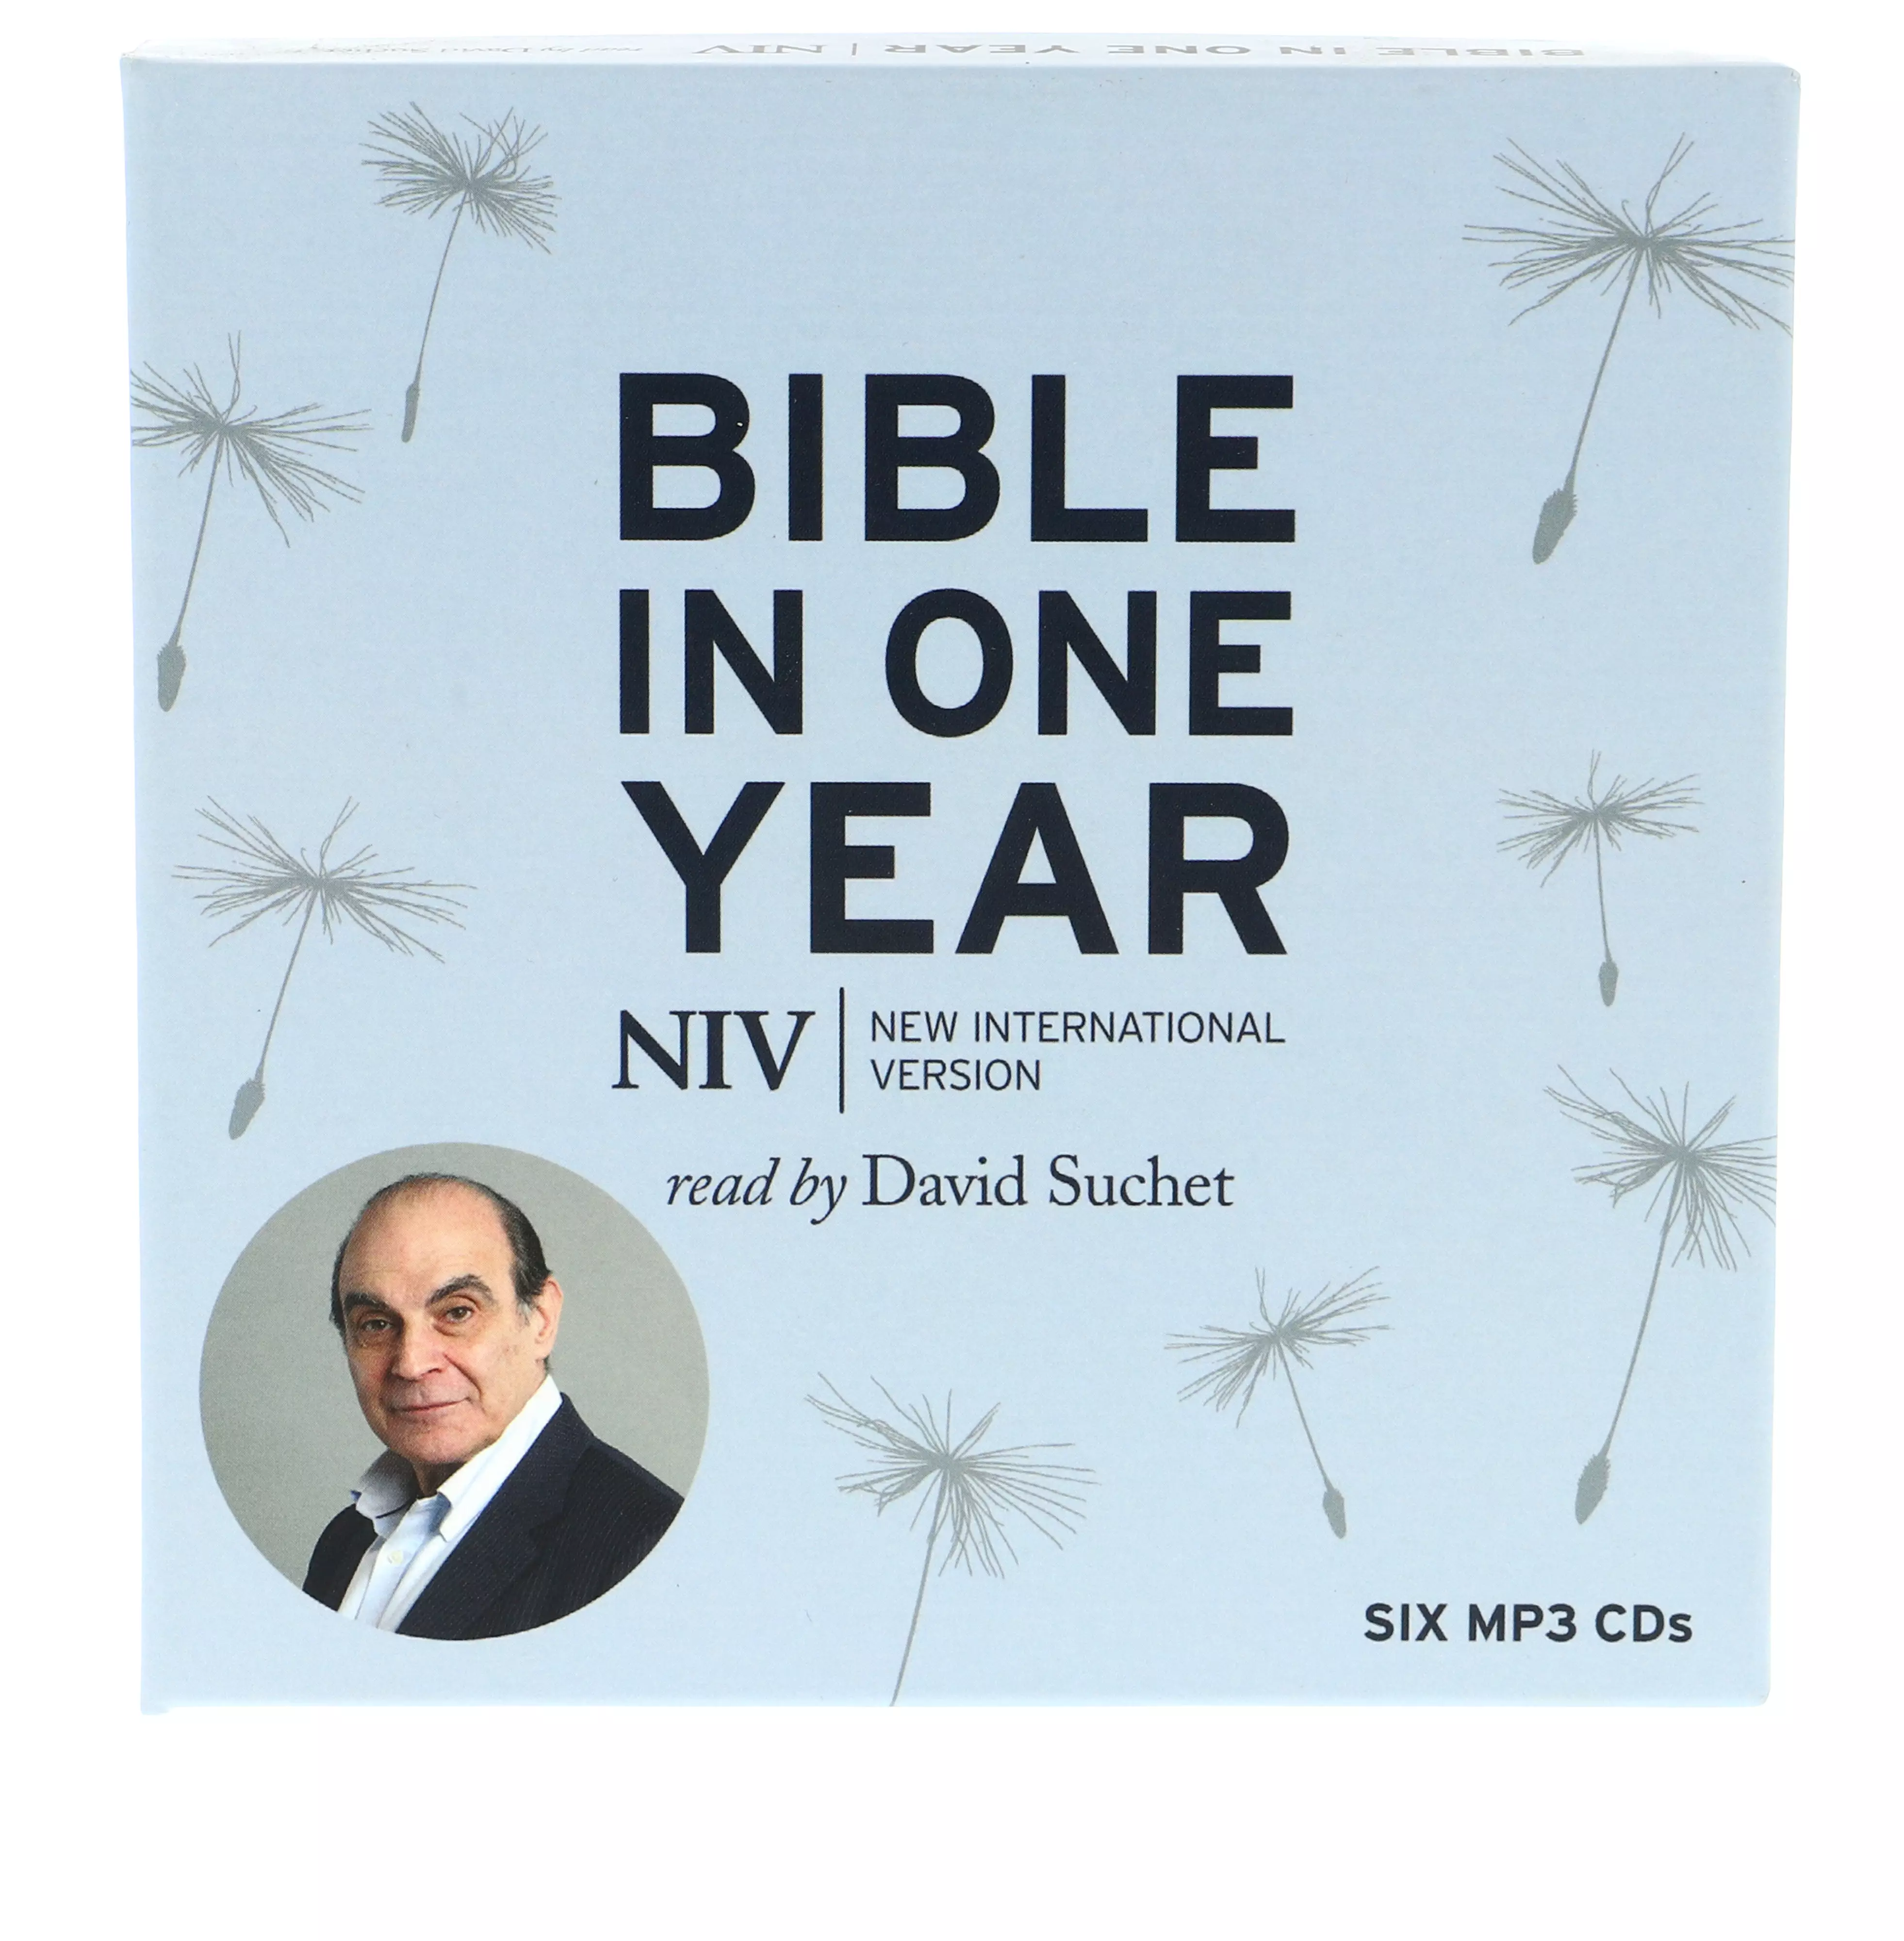 NIV Audio Bible in One Year, Grey, MP3 CD, Read by David Suchet 